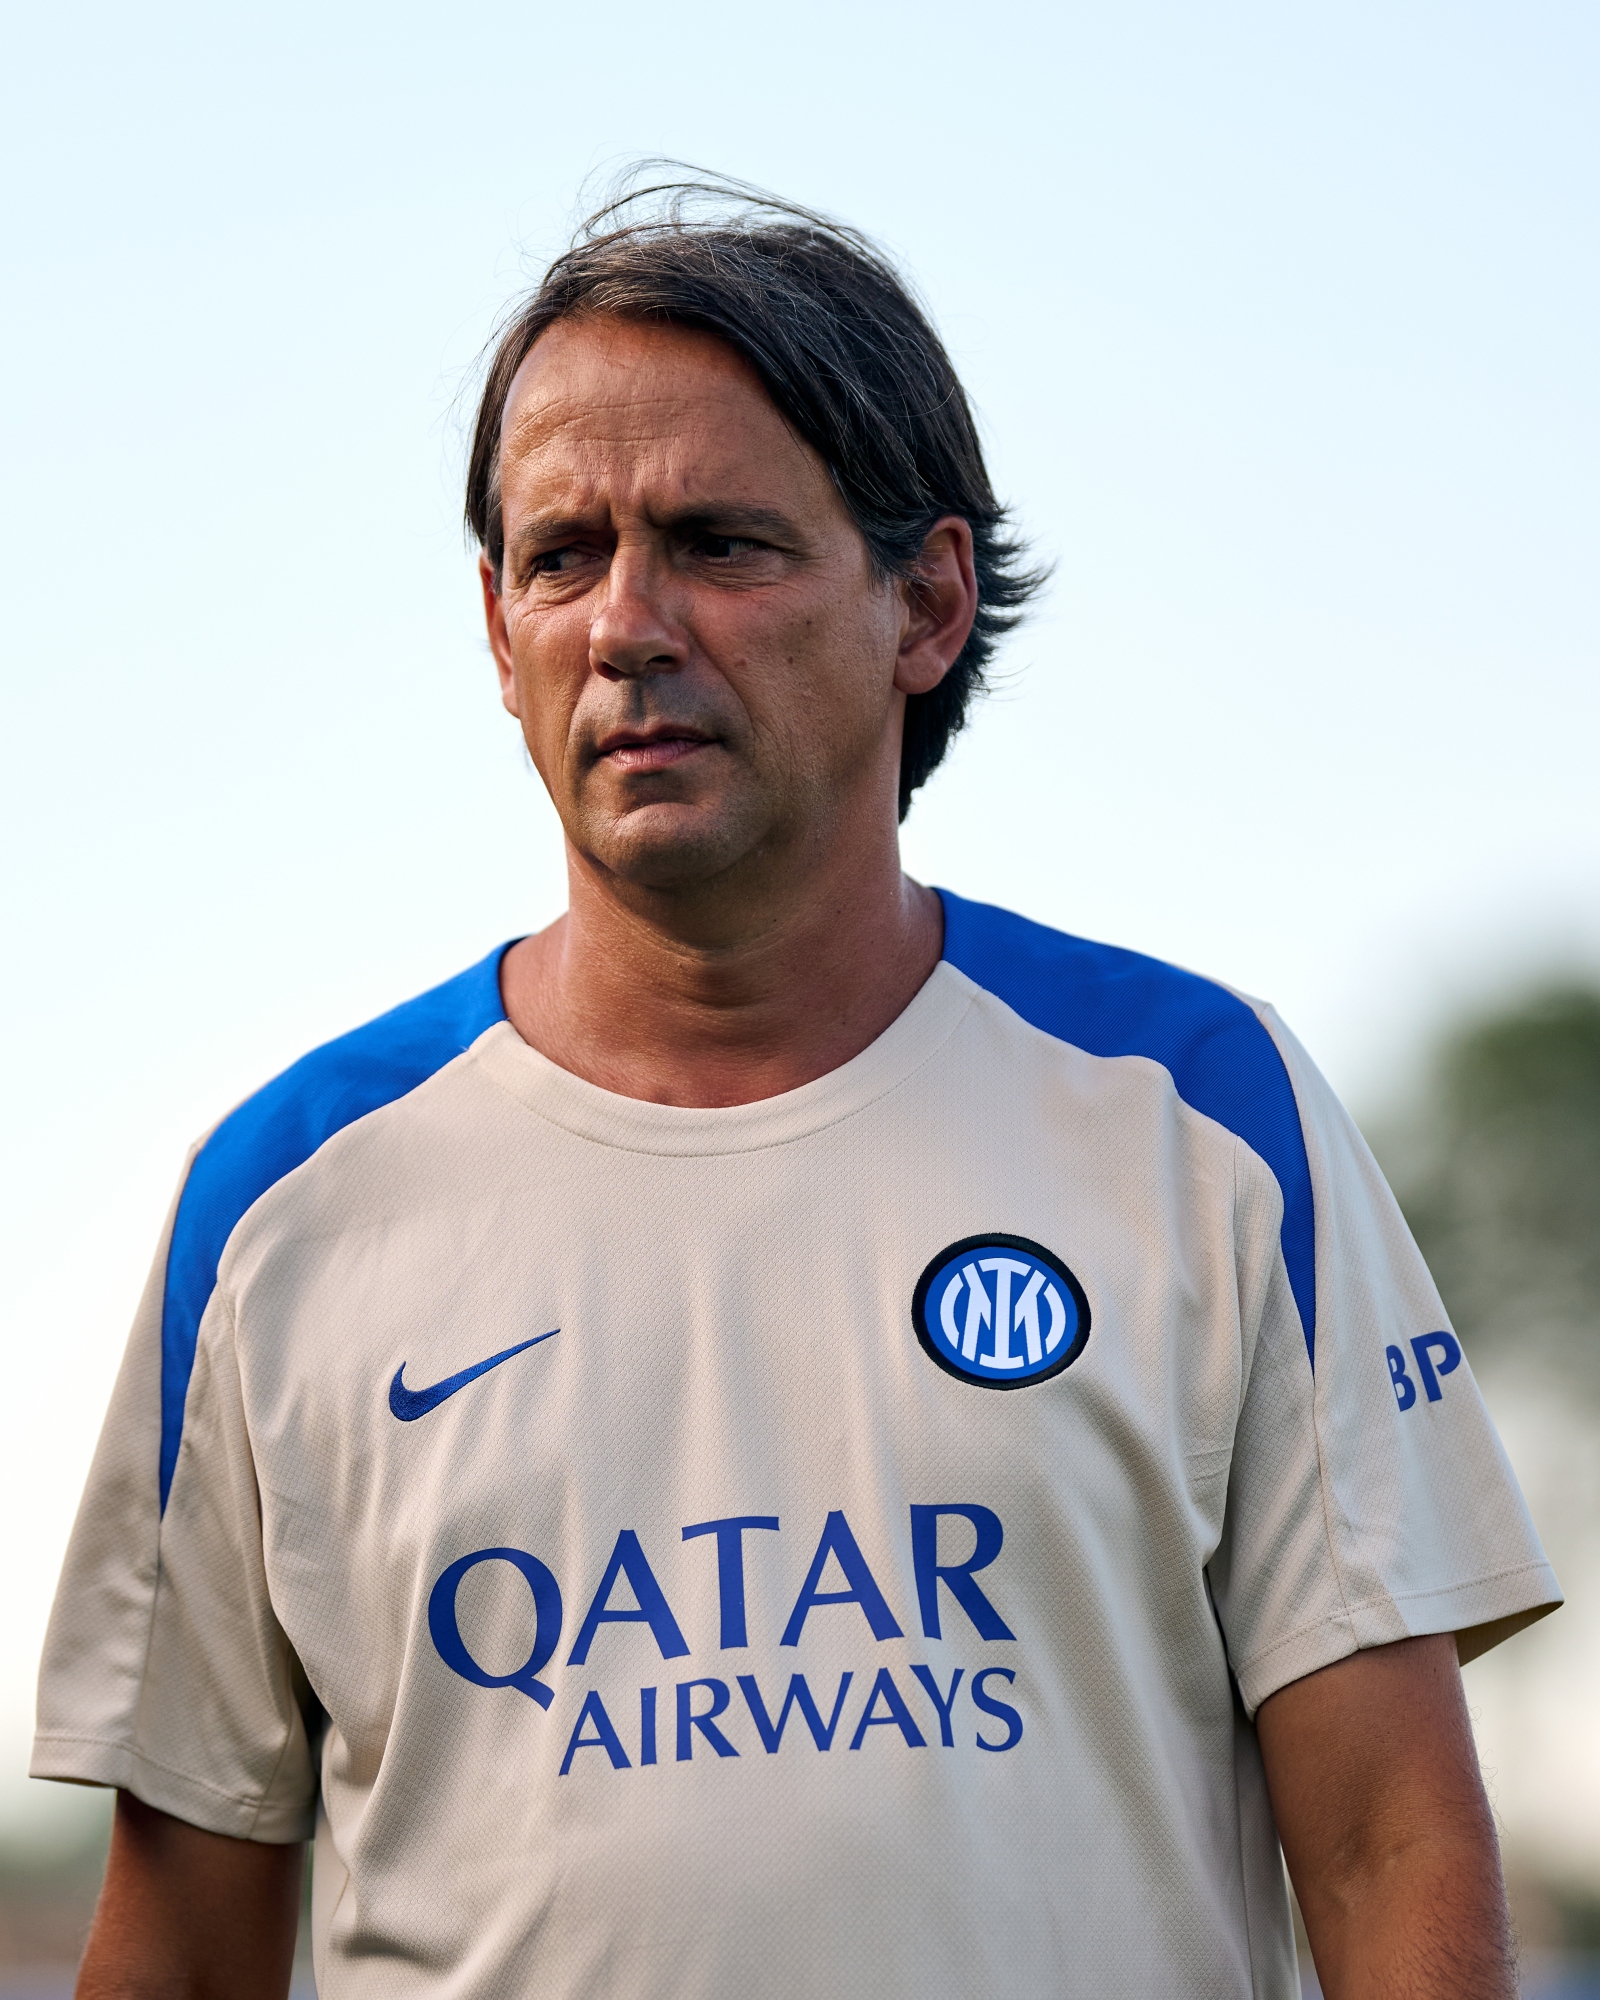 COMO, ITALY - JULY 22: Head Coach Simone Inzaghi of FC Internazionale in action during the pre-season friendly match between FC Internazionale and Pergolettese at Appiano Gentile on July 22, 2024 in Como, Italy. (Photo by Mattia Ozbot - Inter/Inter via Getty Images)